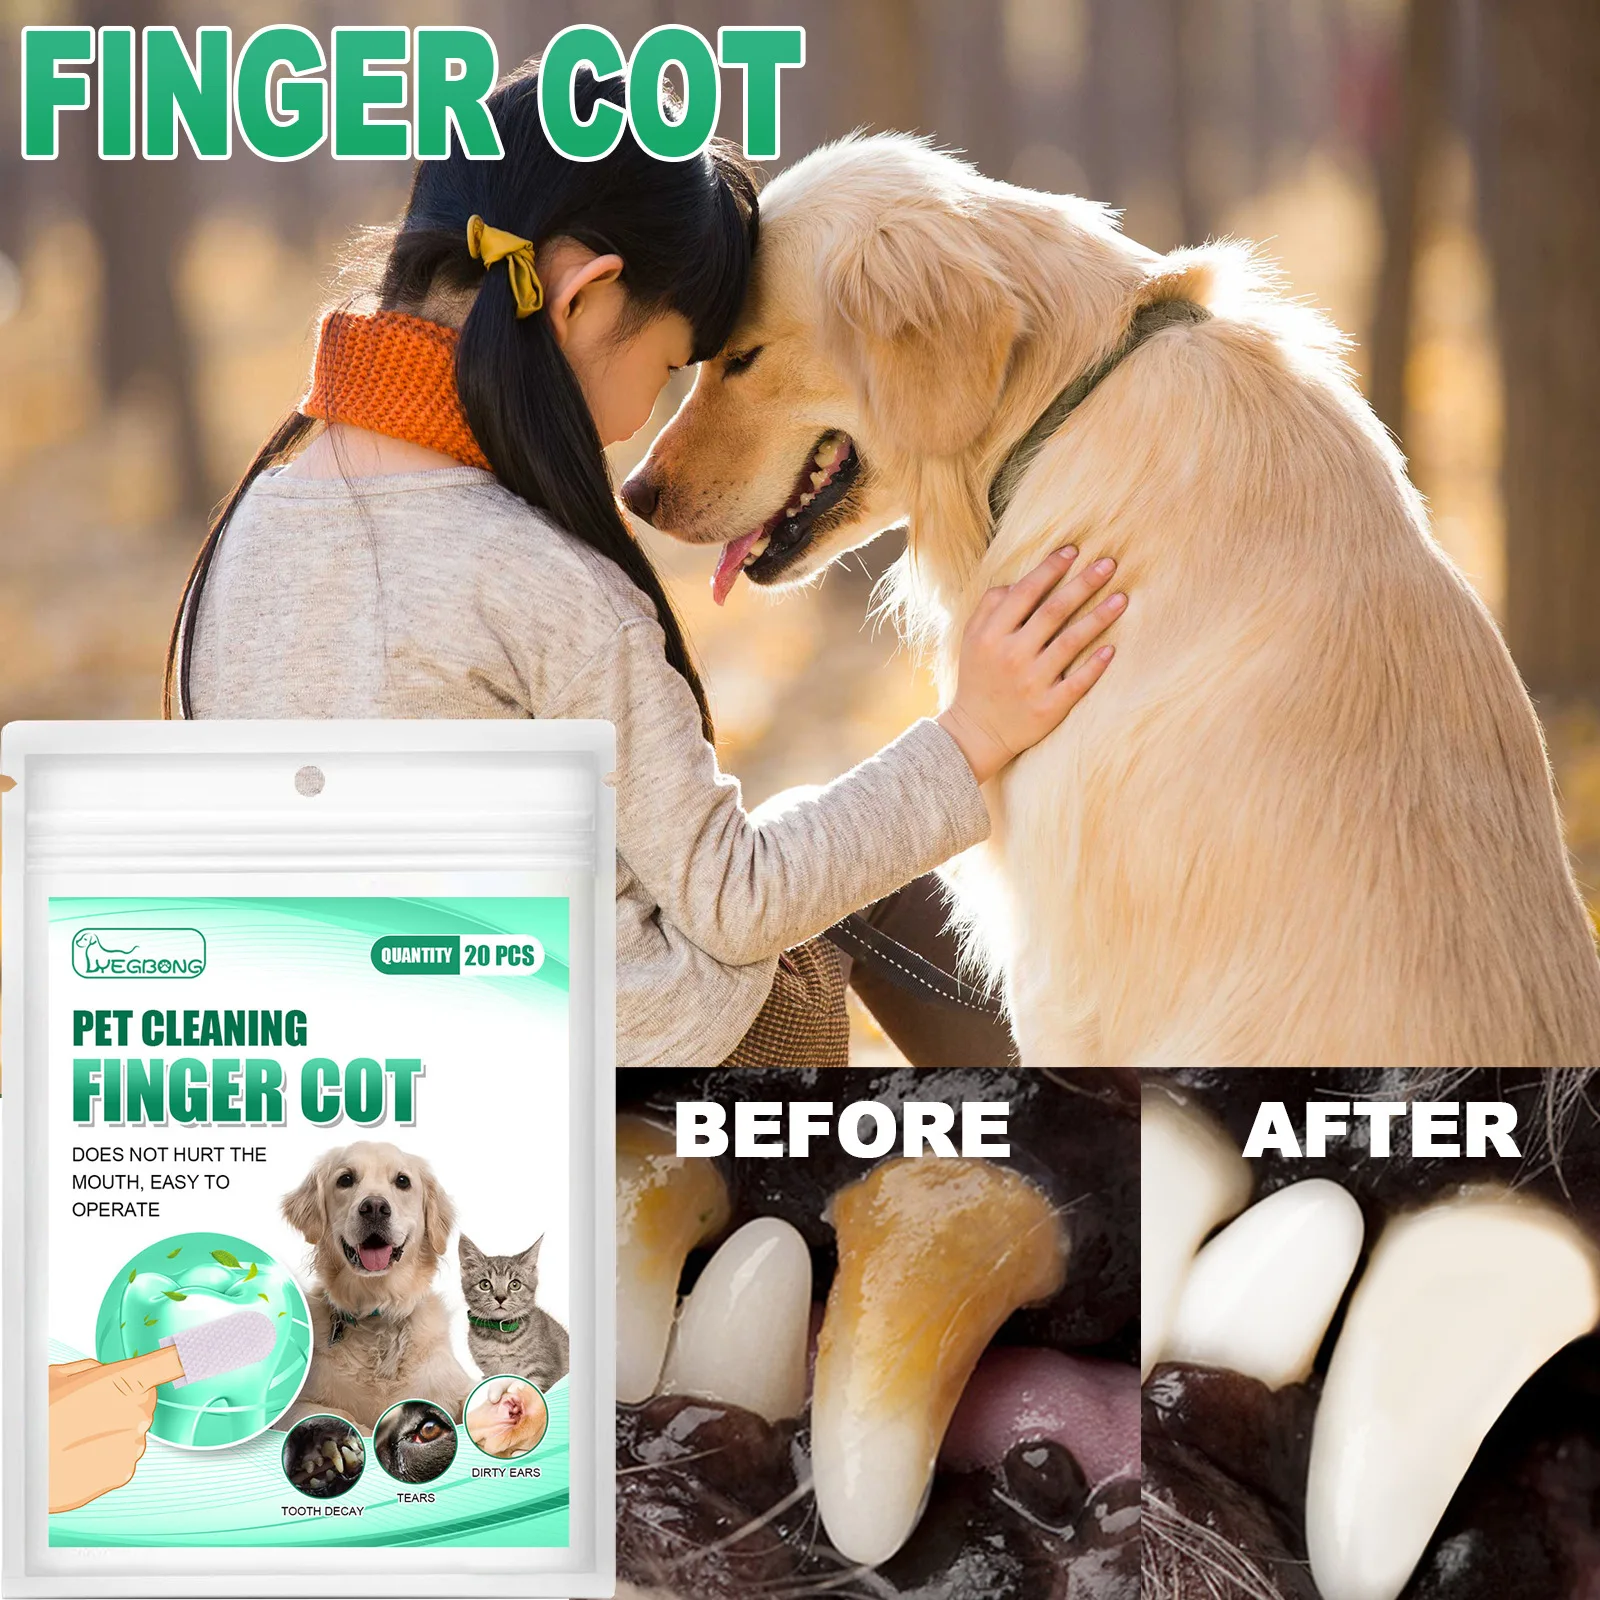 

20pcs/bag Finger Wet Wipes Remove Tartar Cochlear Cleaning for Pets Dogs Cats Oral Care Finger Cover Pet Teeth Finger Cot